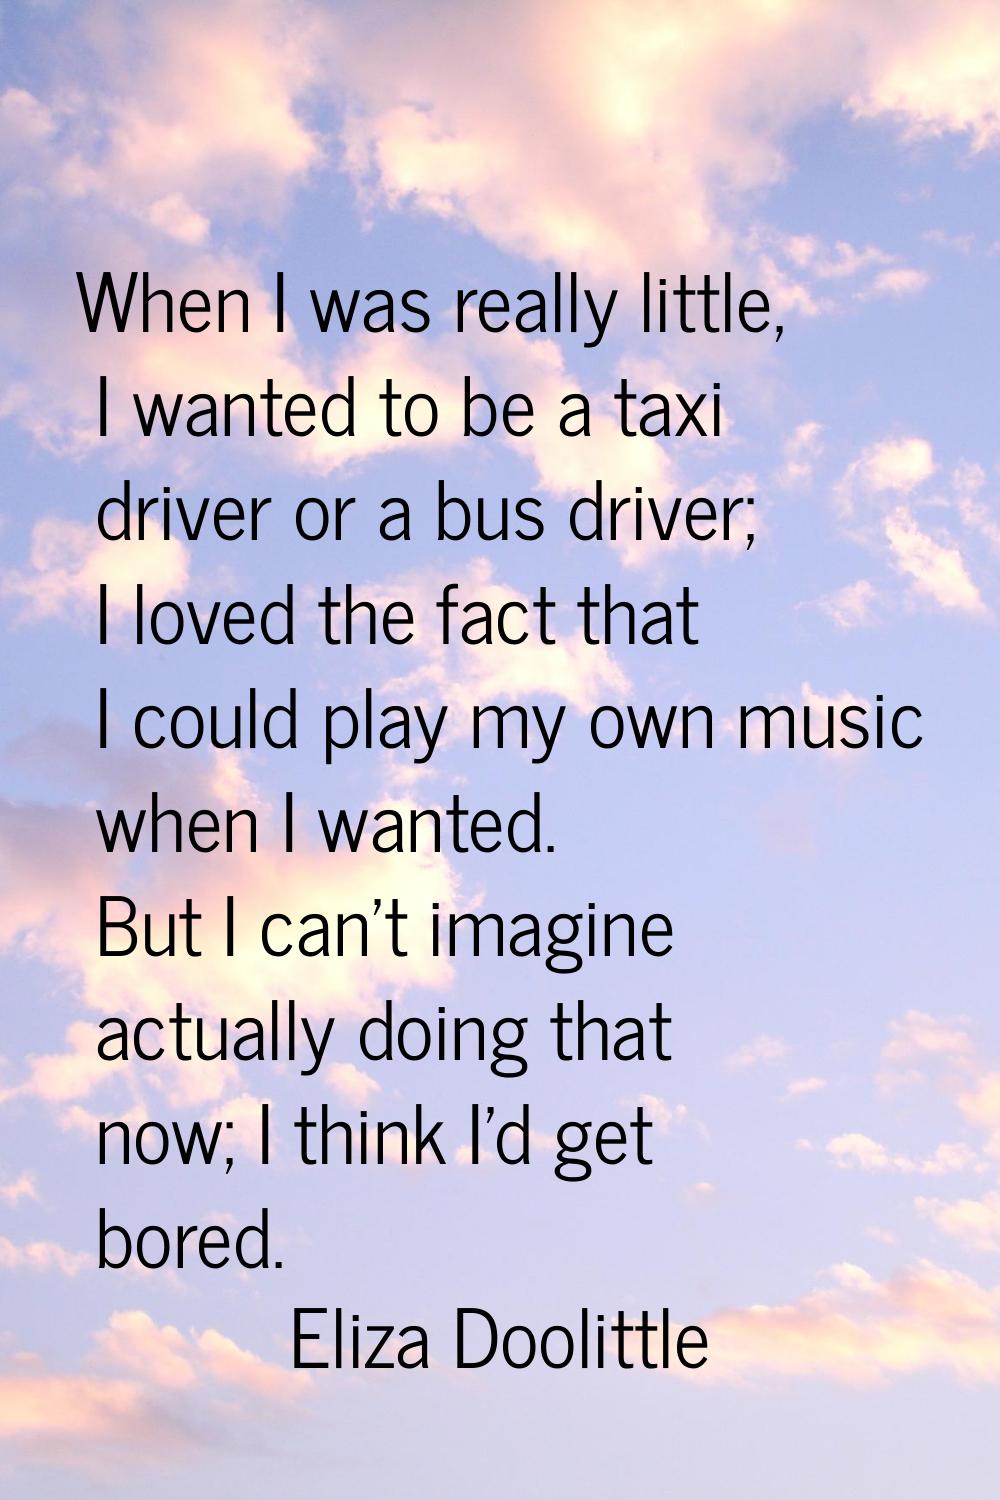 When I was really little, I wanted to be a taxi driver or a bus driver; I loved the fact that I cou